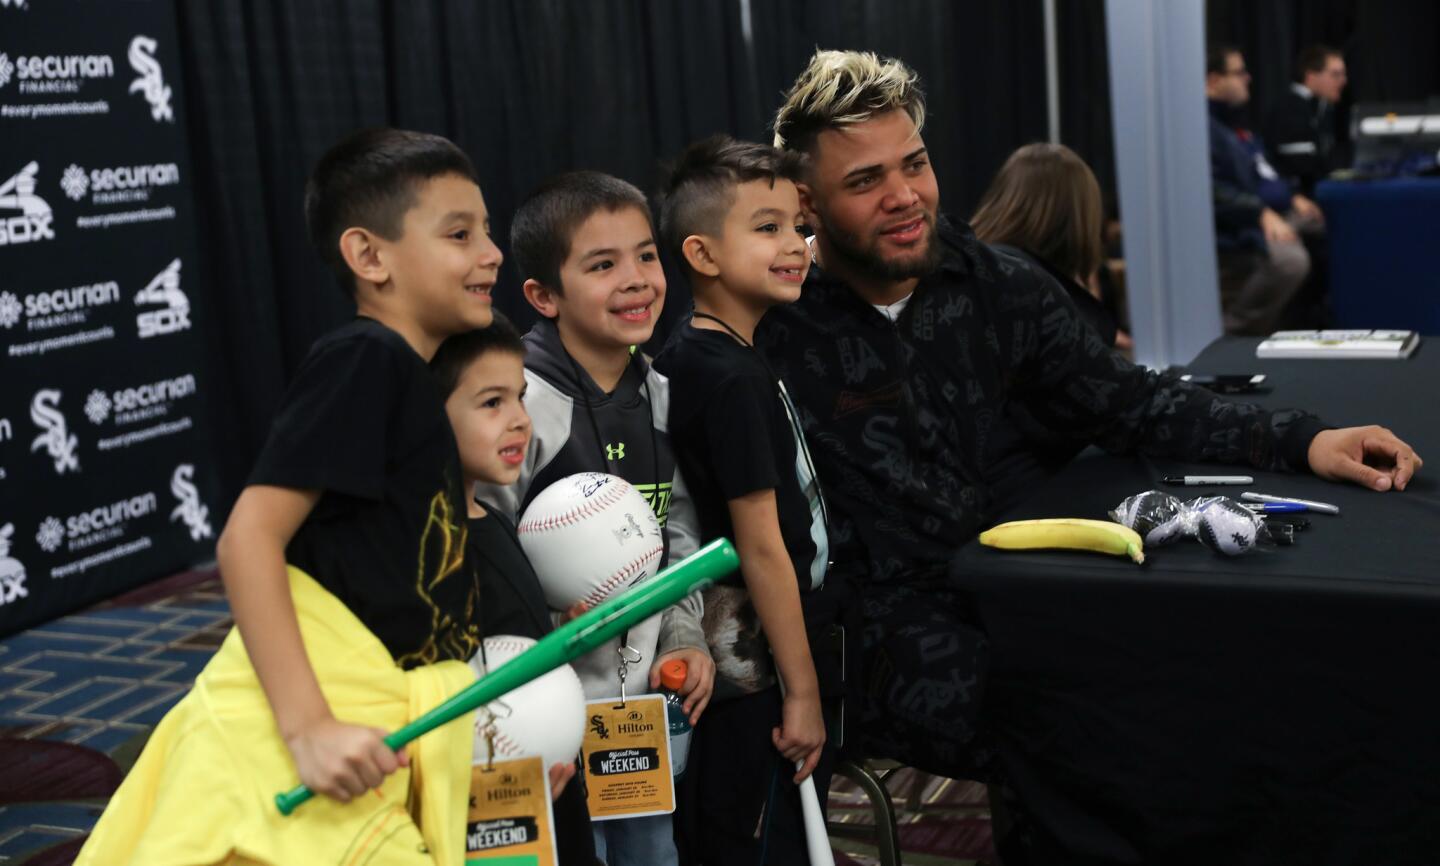 From left, White Sox fans A.J. Melendez, 8, Jaxson Rubio, 5, Liam Rubio, 7, and Isius Maciel, 7, pose for a photo with the Sox's Yoan Moncada on Jan. 26, 2019, at the Hilton Chicago.